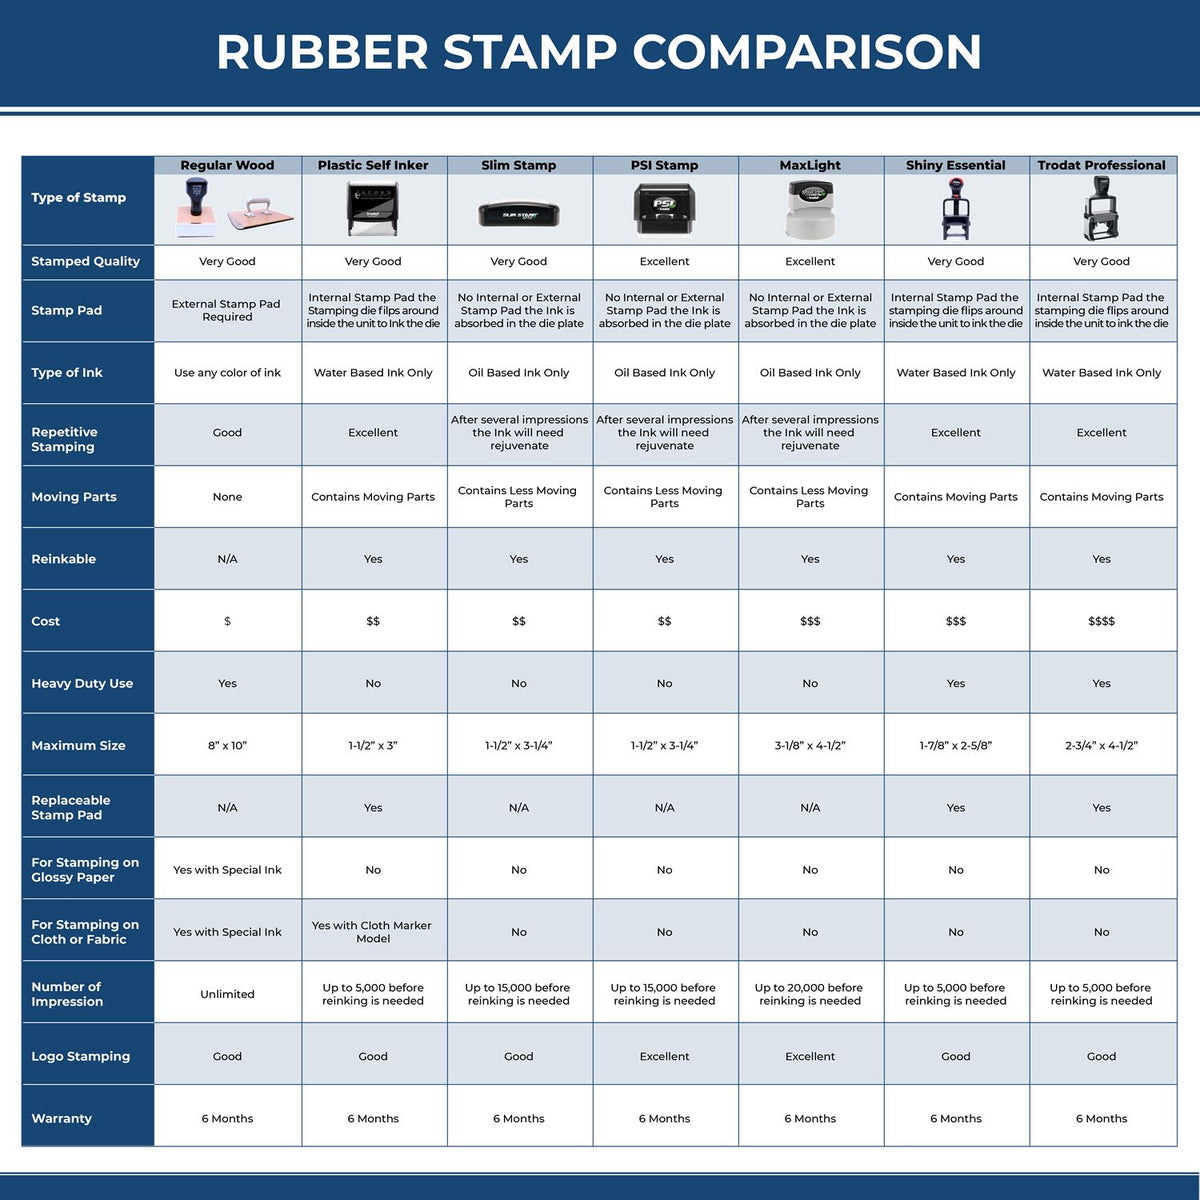 A comparison chart for the different types of mount models available for the Super Slim Colorado Notary Public Stamp.